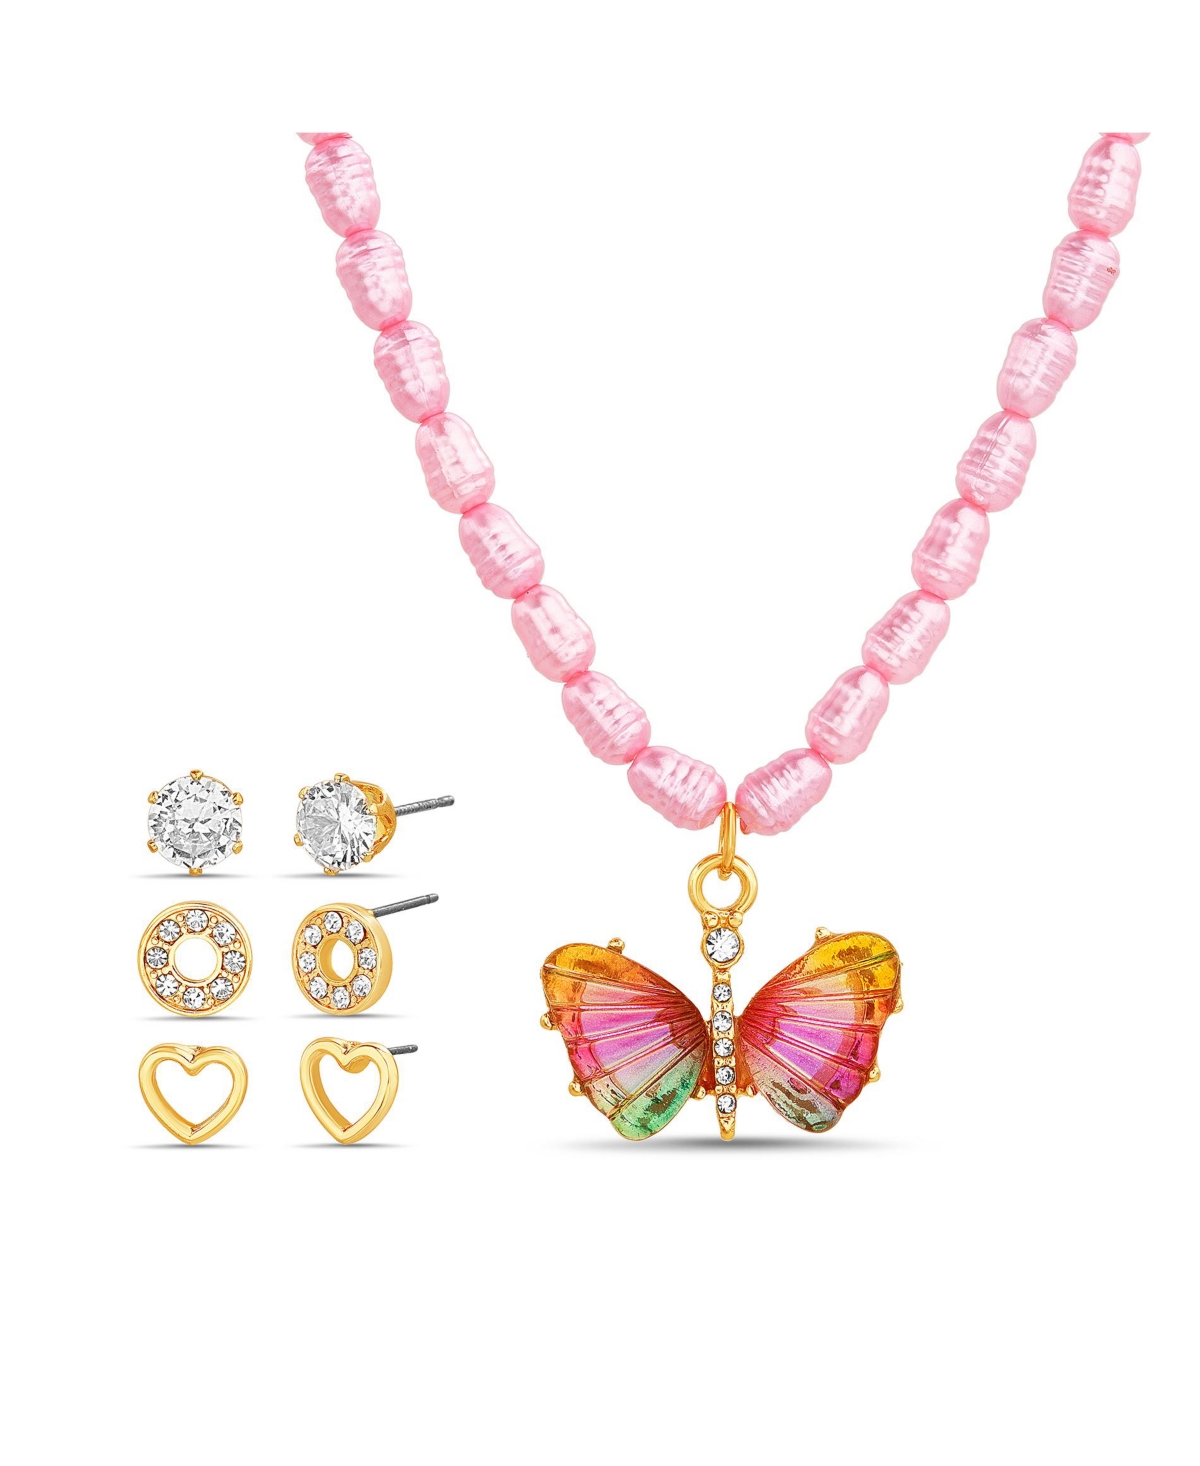 3 Piece Mixed Earring Set with Pearl Butterfly Pendant Necklace - Multi